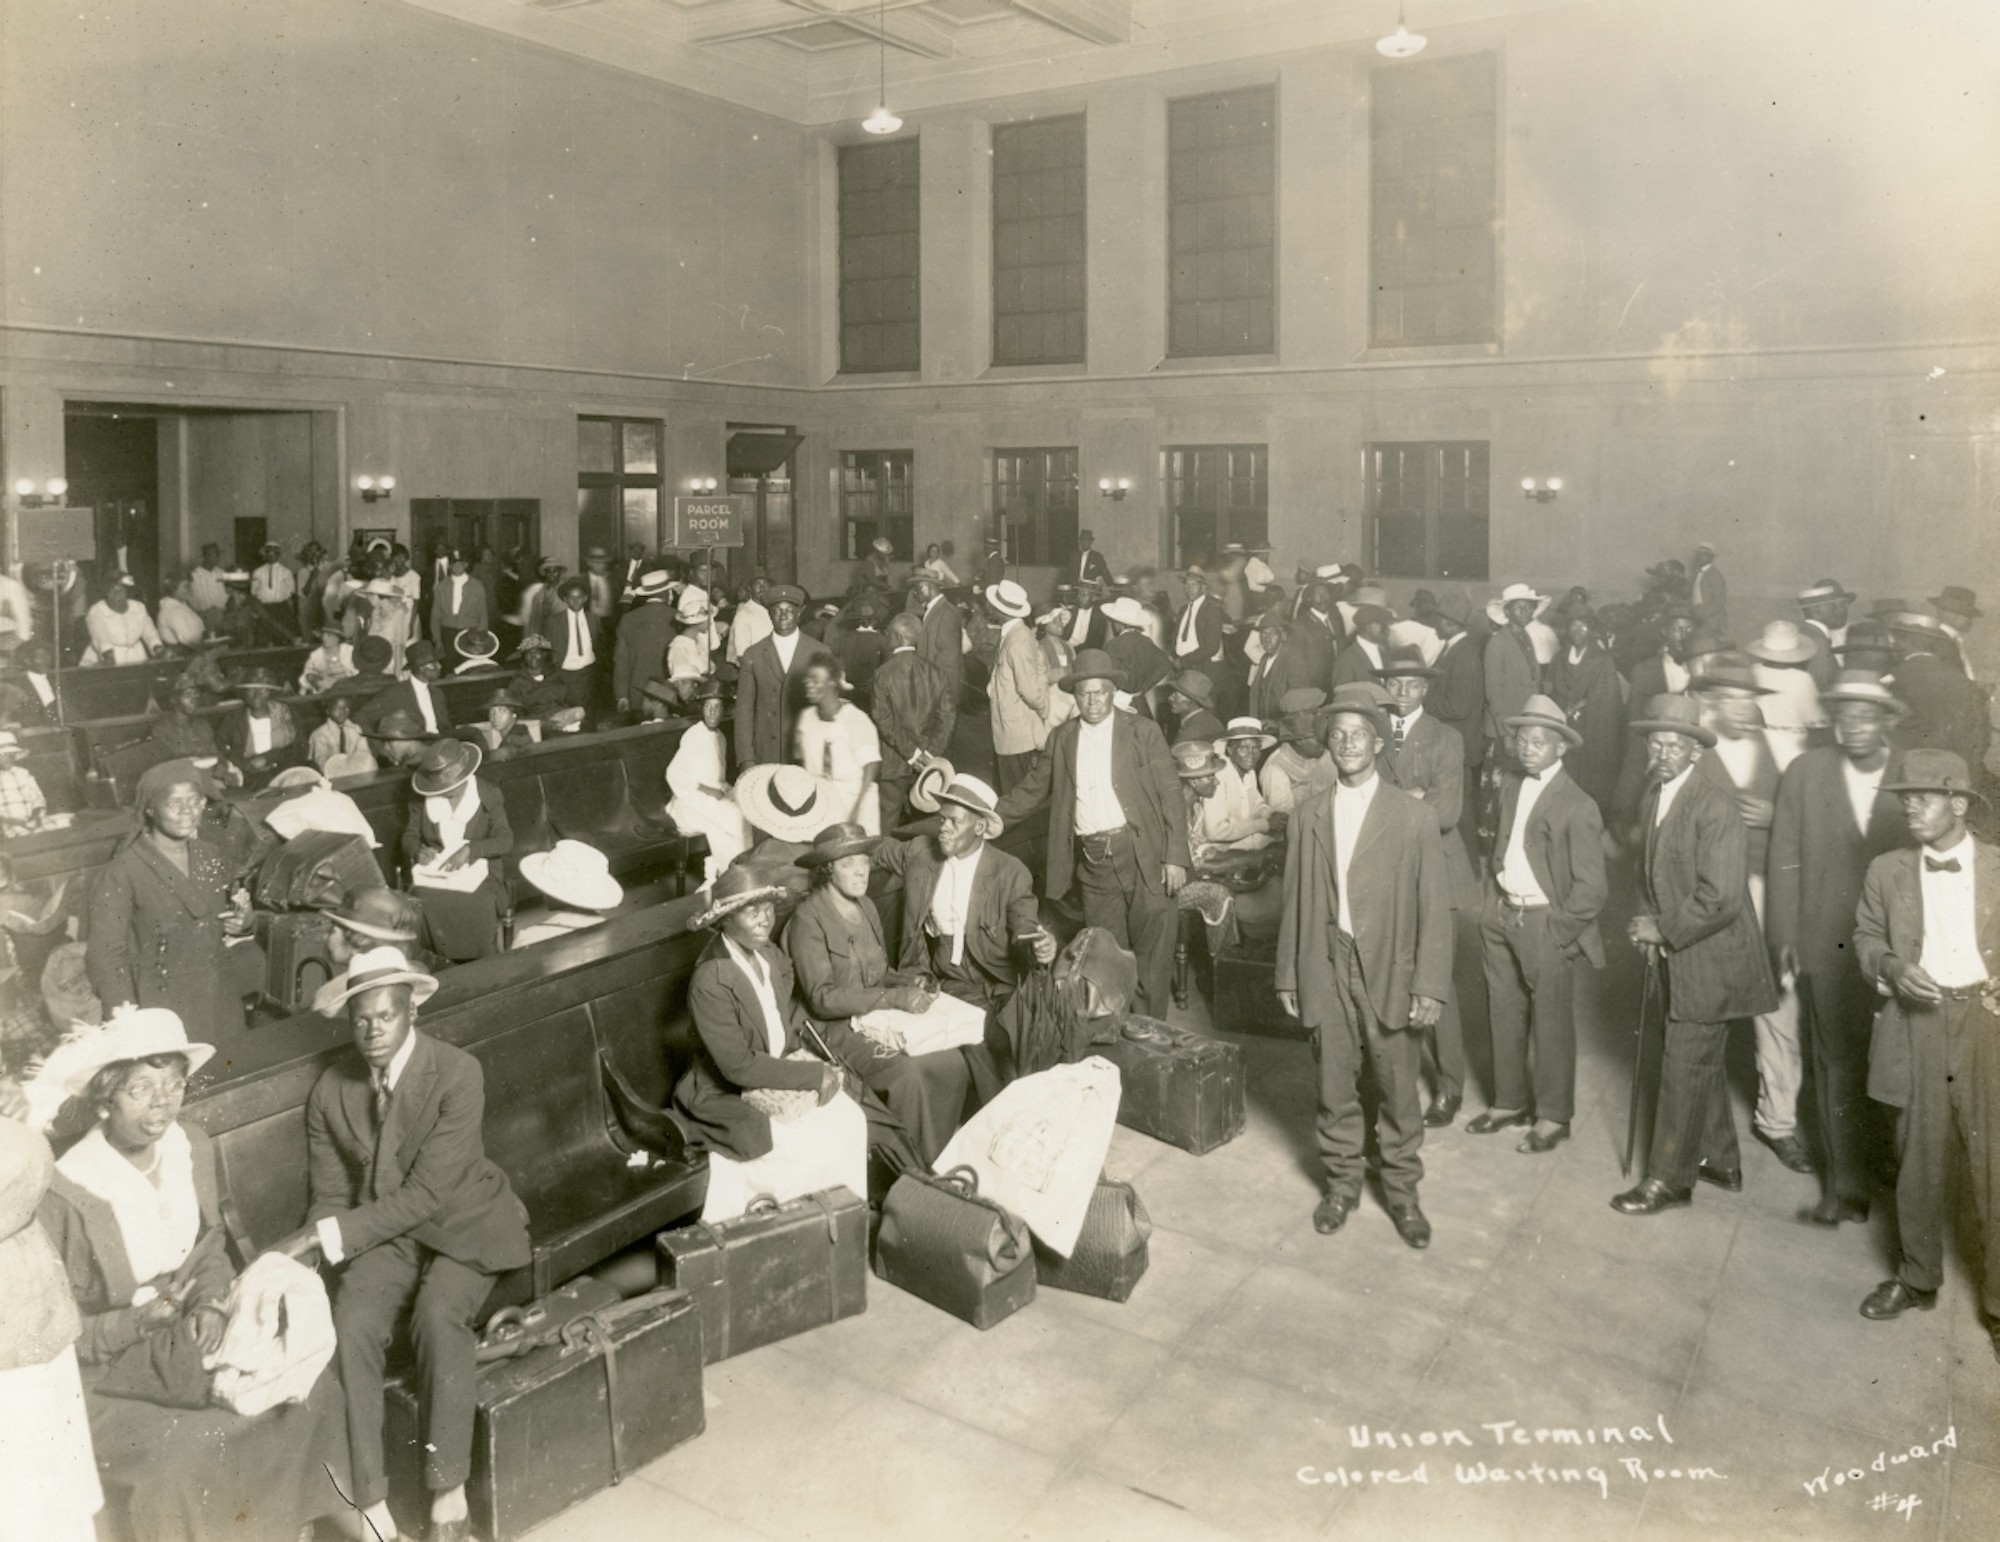 African Americans gather in a segregated waiting area at a train station